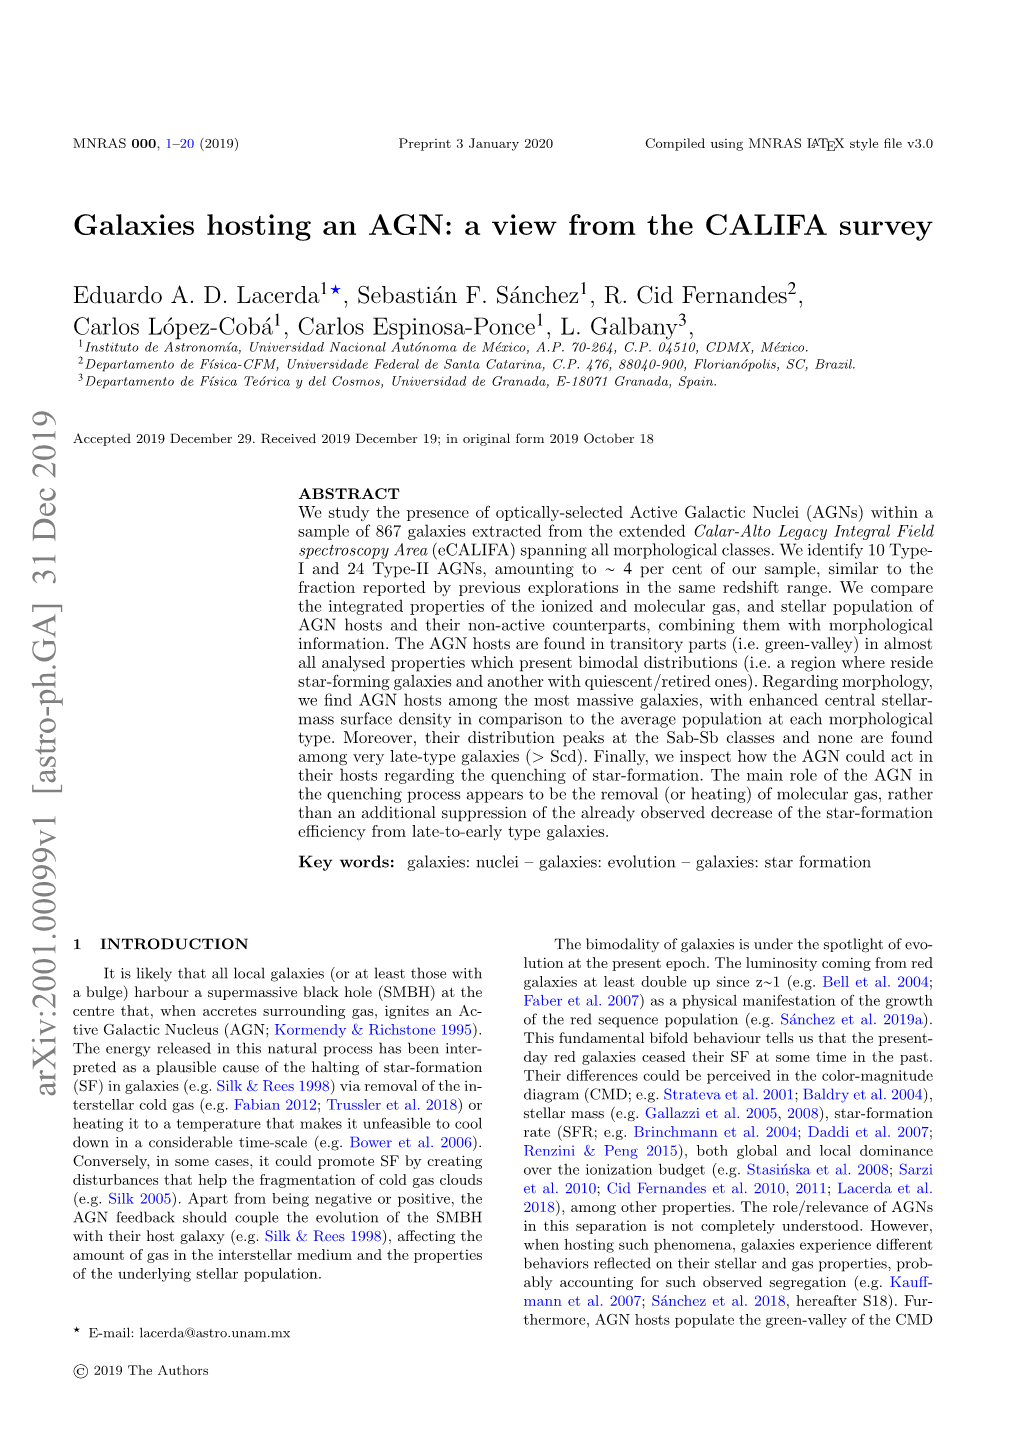 Galaxies Hosting an AGN: a View from the CALIFA Survey